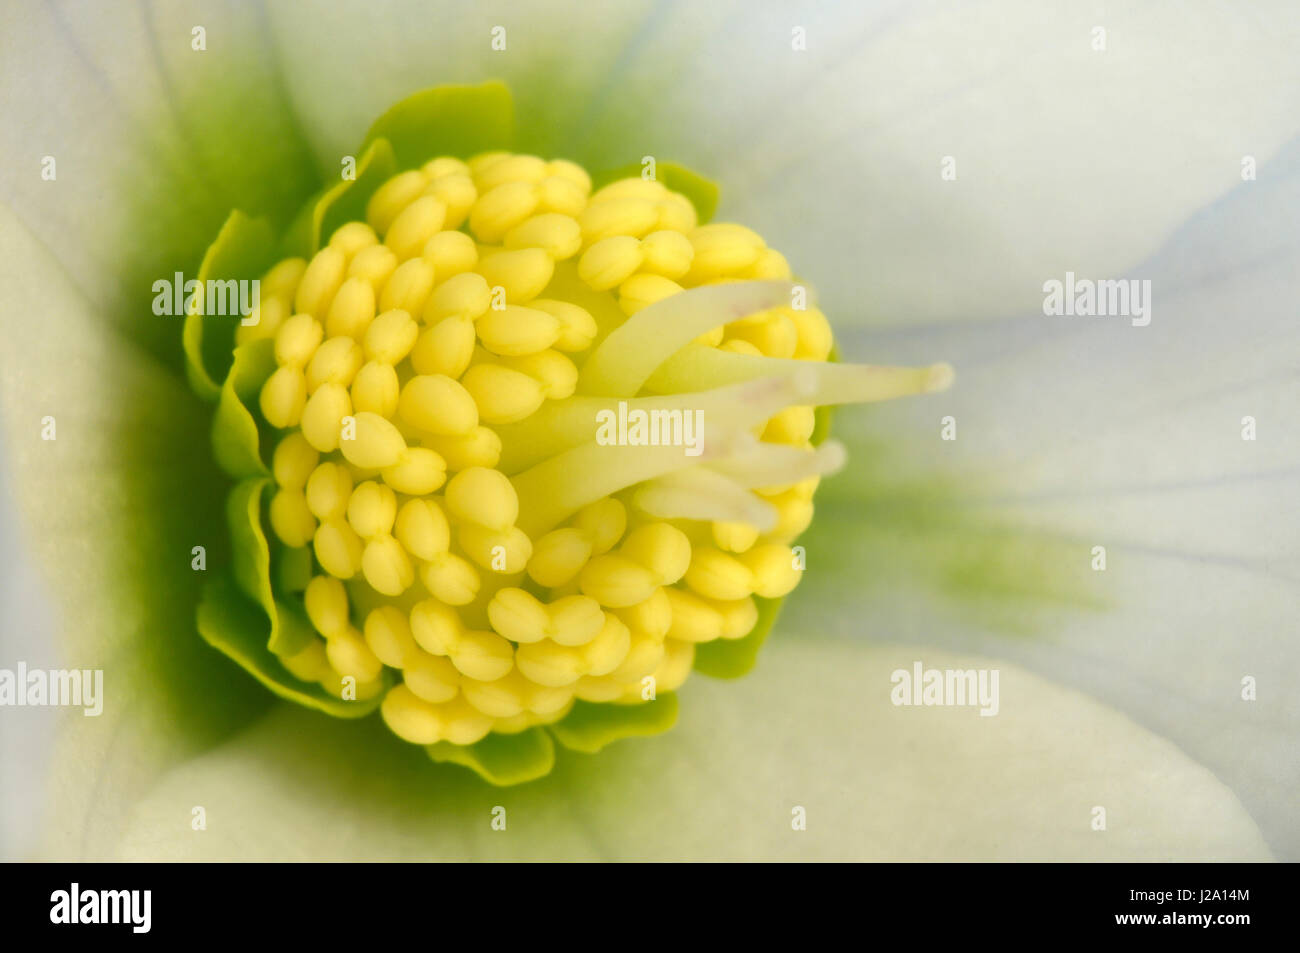 Heart of a Christmas Rose flower in close-up Stock Photo